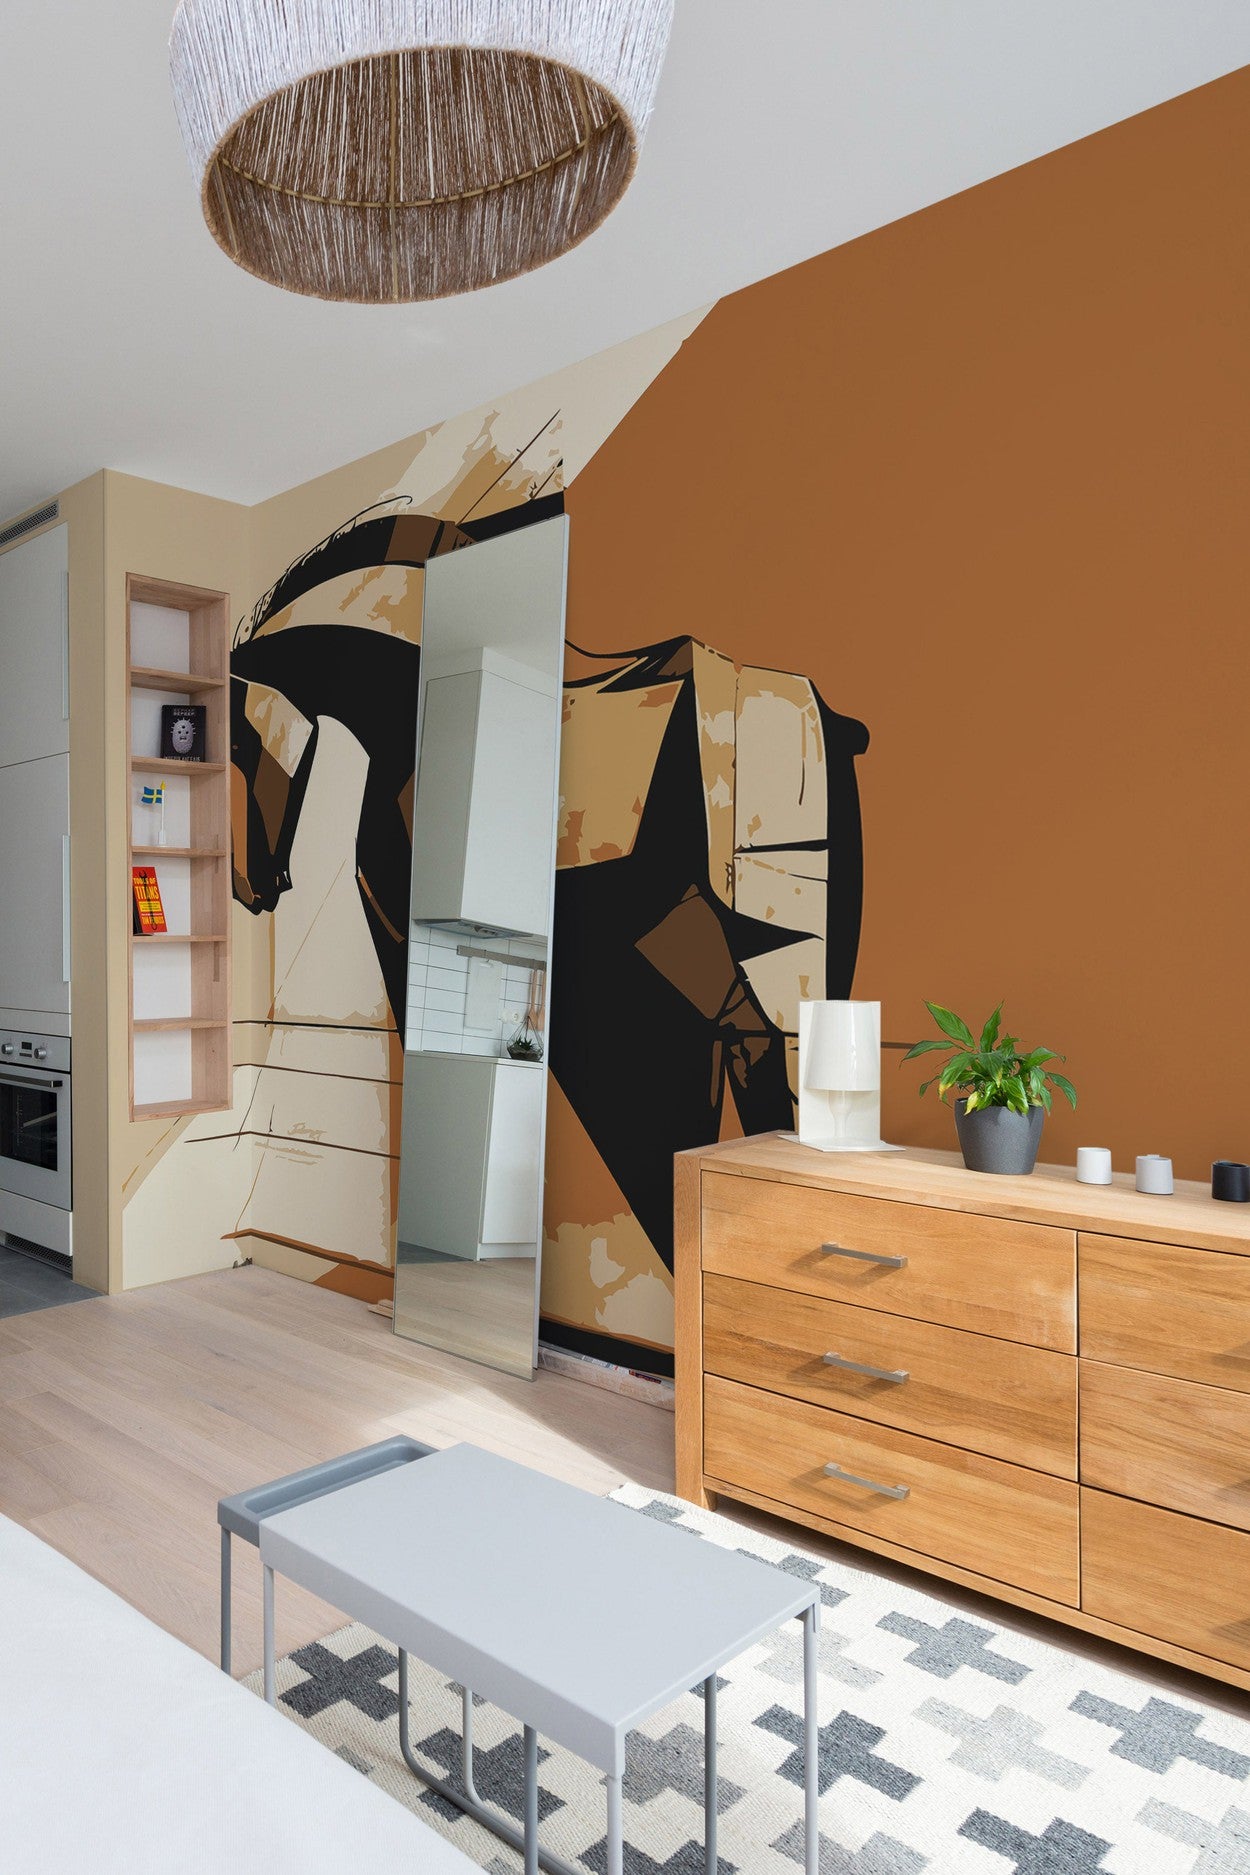 A contemporary living room interior with a large abstract horse mural on the wall